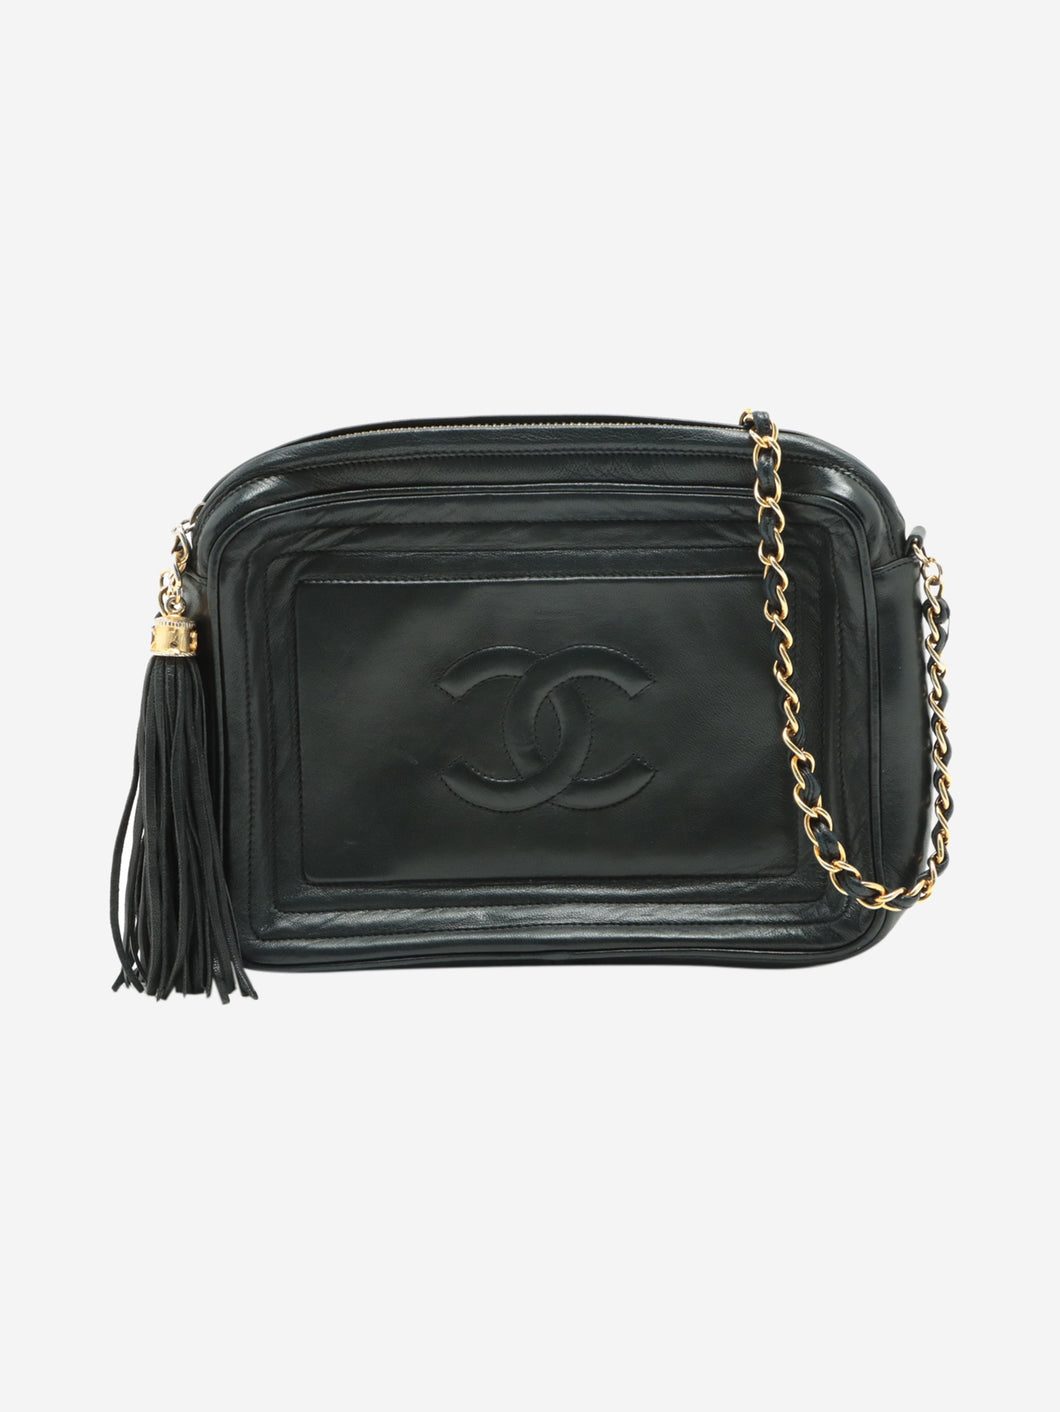 Chanel pre-owned black 1986-1988 CC chain leather shoulder bag